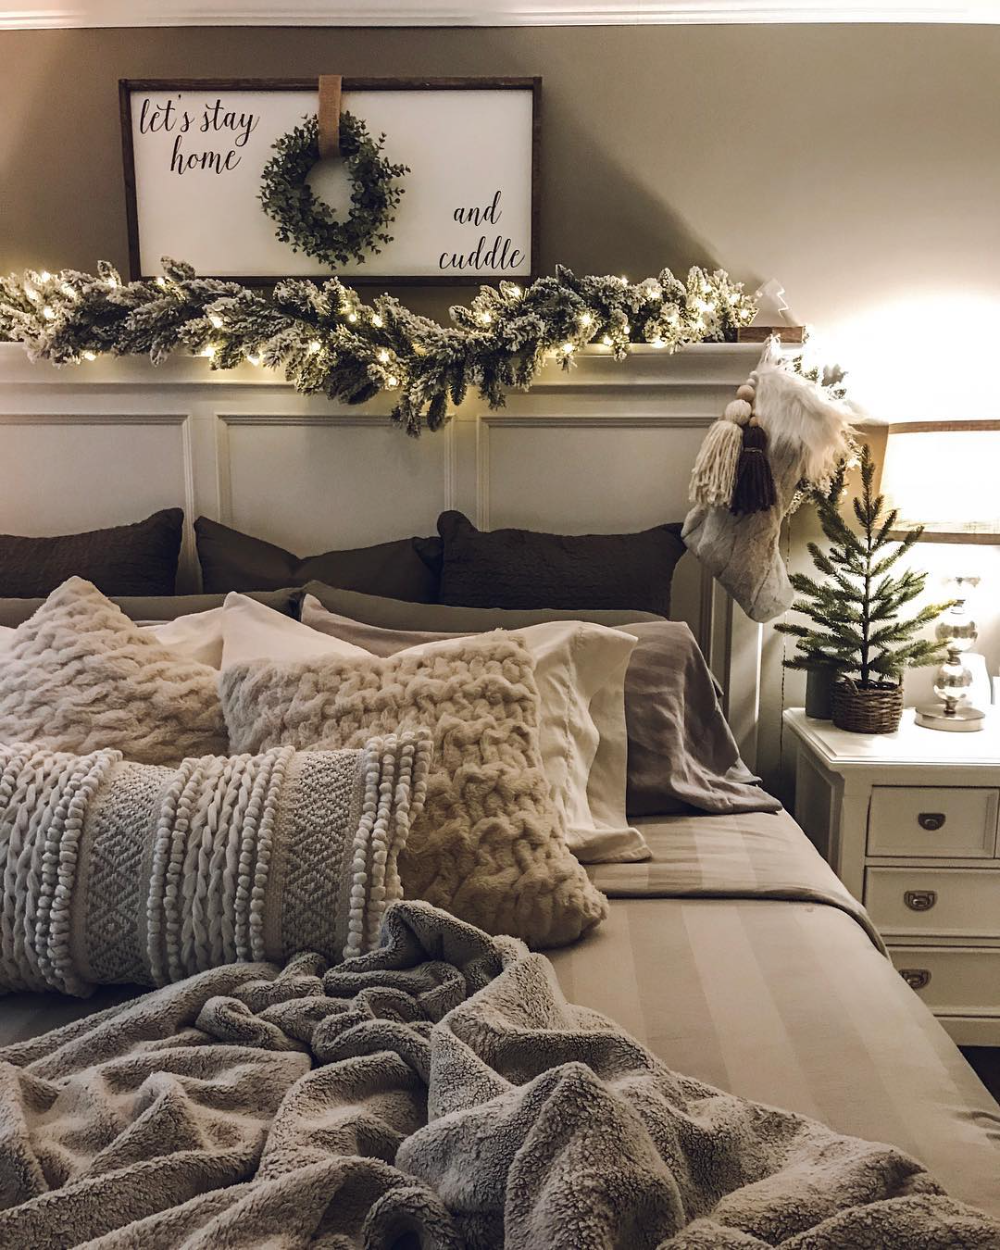 Top 37 Christmas Bedroom Decorations Ideas 2020 - Page 5 of 37 - newyearlights. com - Top 37 Christmas Bedroom Decorations Ideas 2020 - Page 5 of 37 - newyearlights. com -   18 christmas decor for bedroom cozy ideas